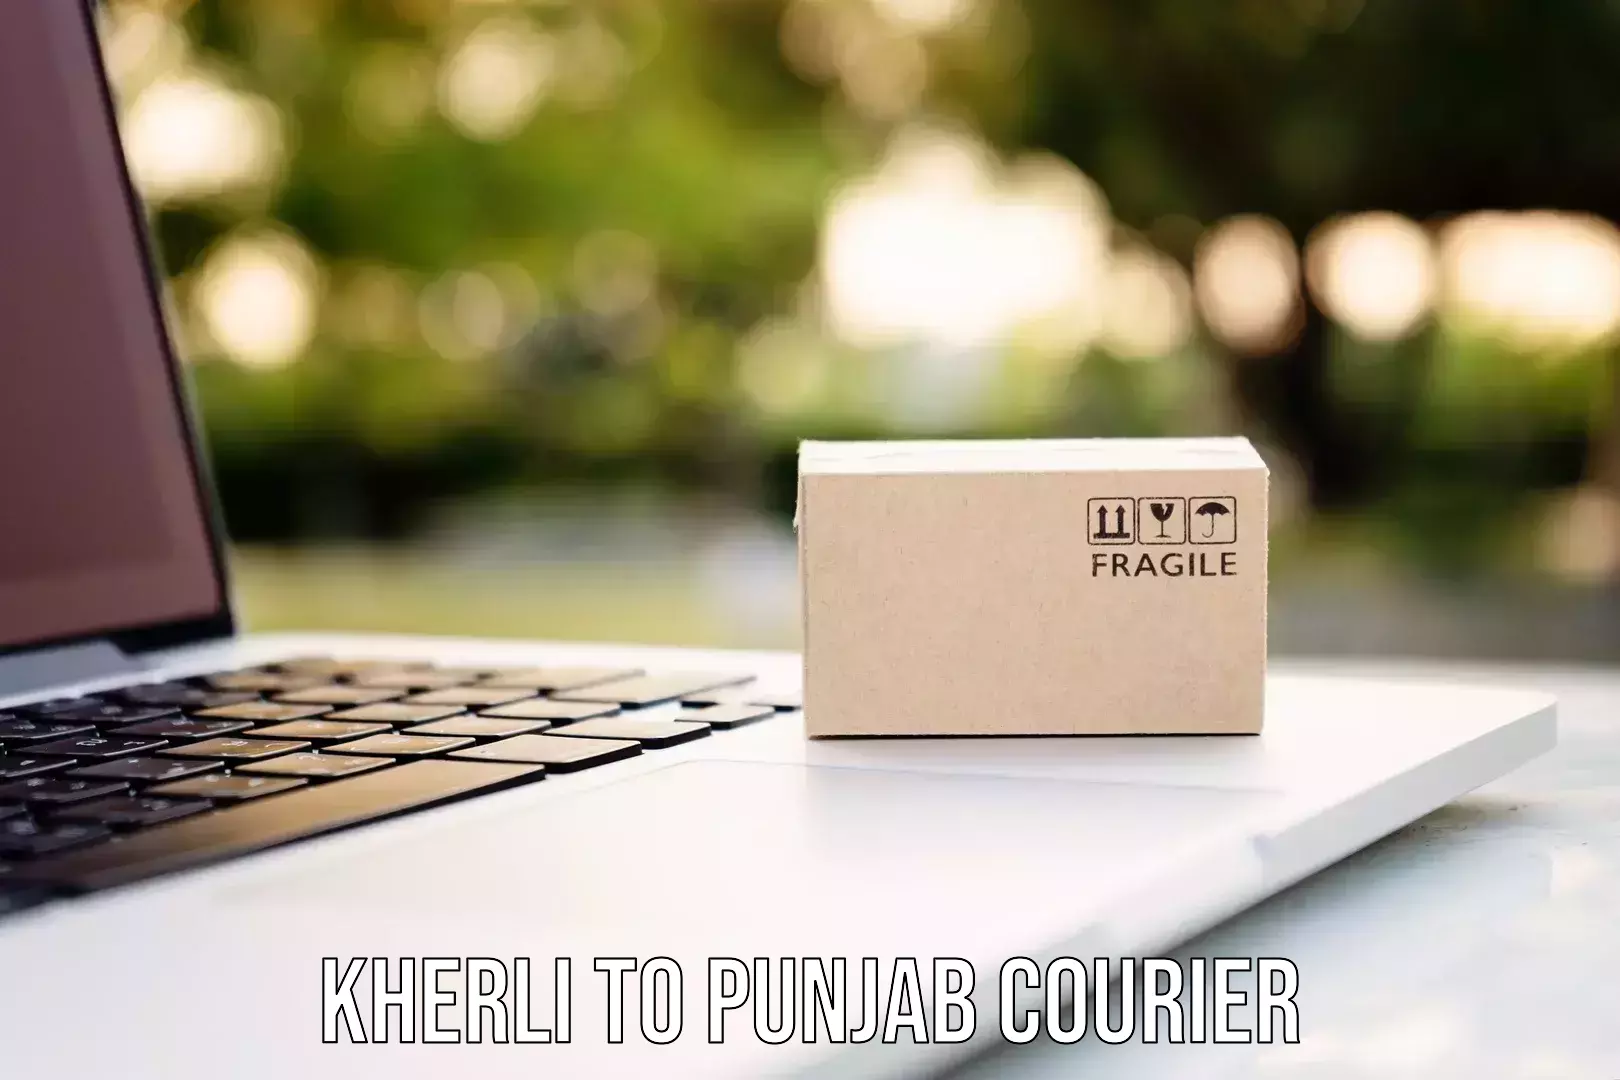 Courier services in Kherli to Punjab